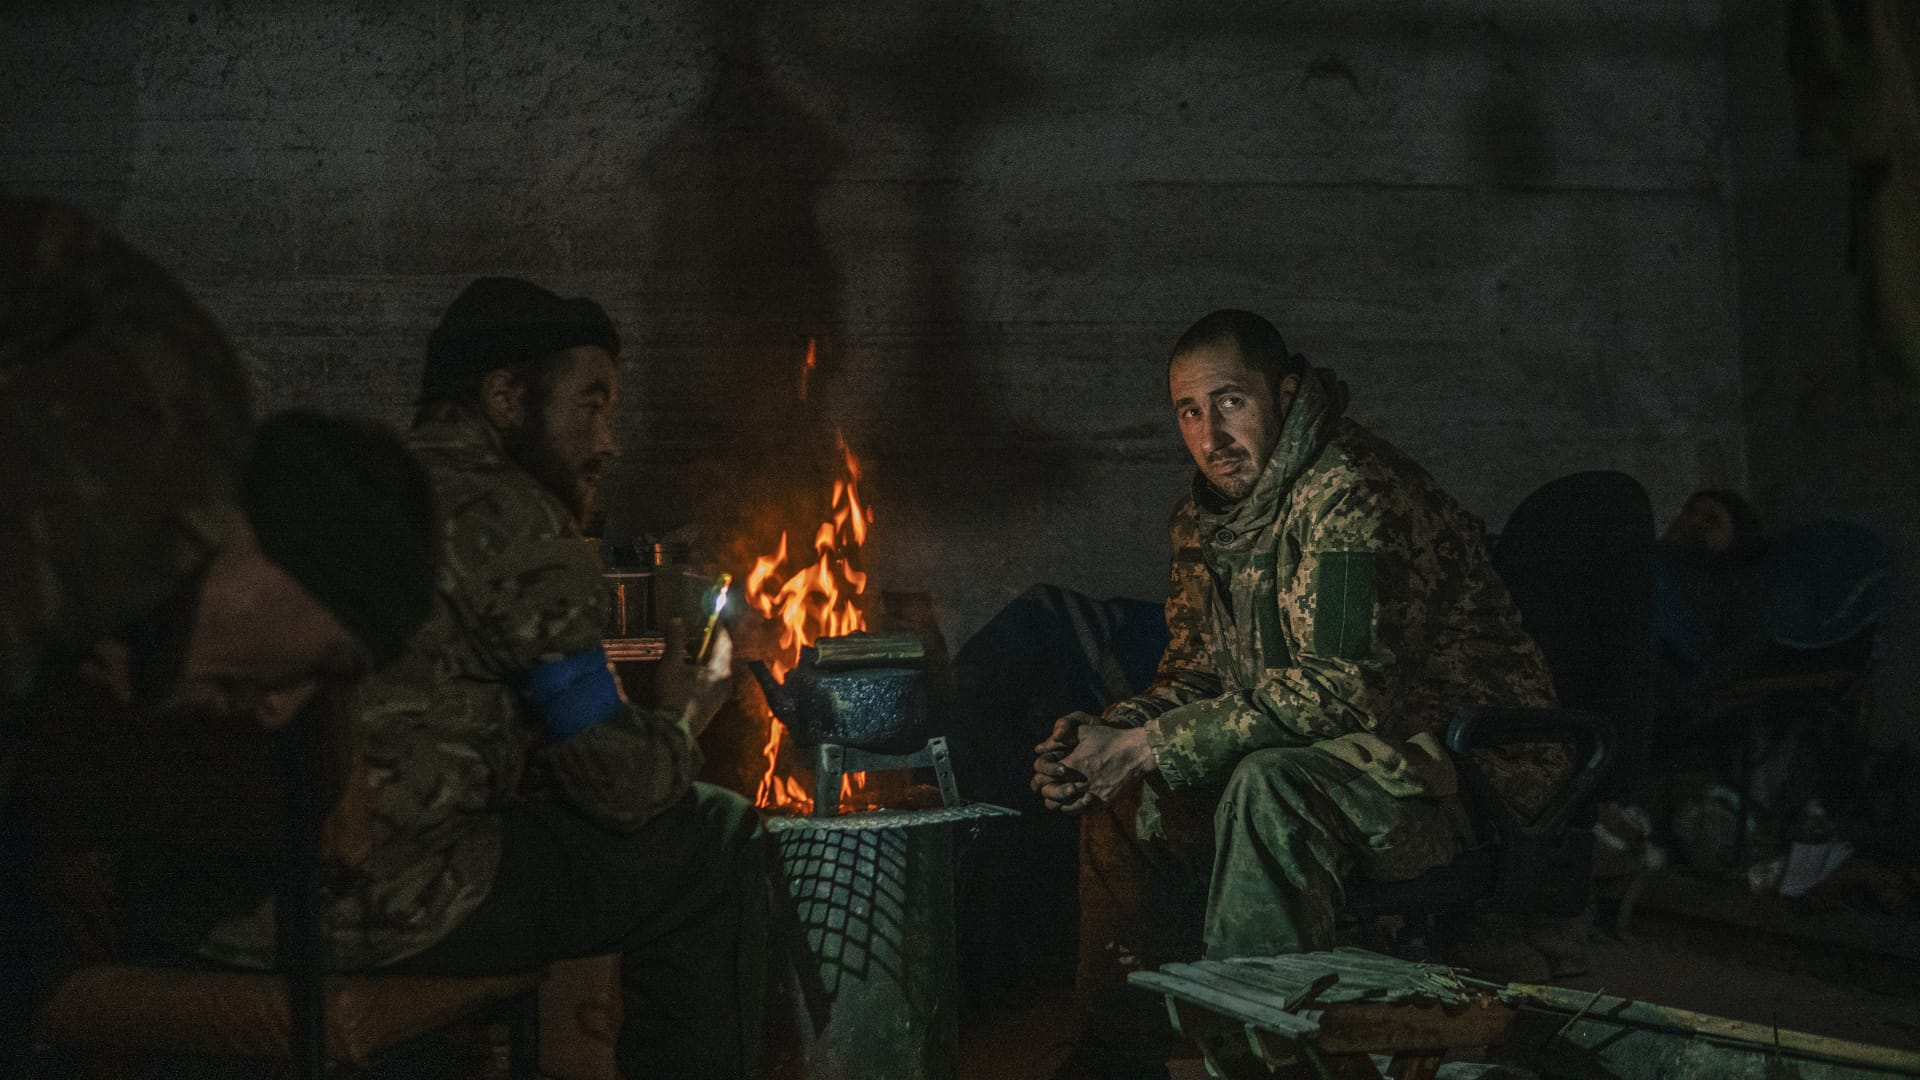 Ukrainian soldiers inside the ruined Azovstal steel plant take a rest in their shelter in Mariupol, Ukraine, May 7, 2022.